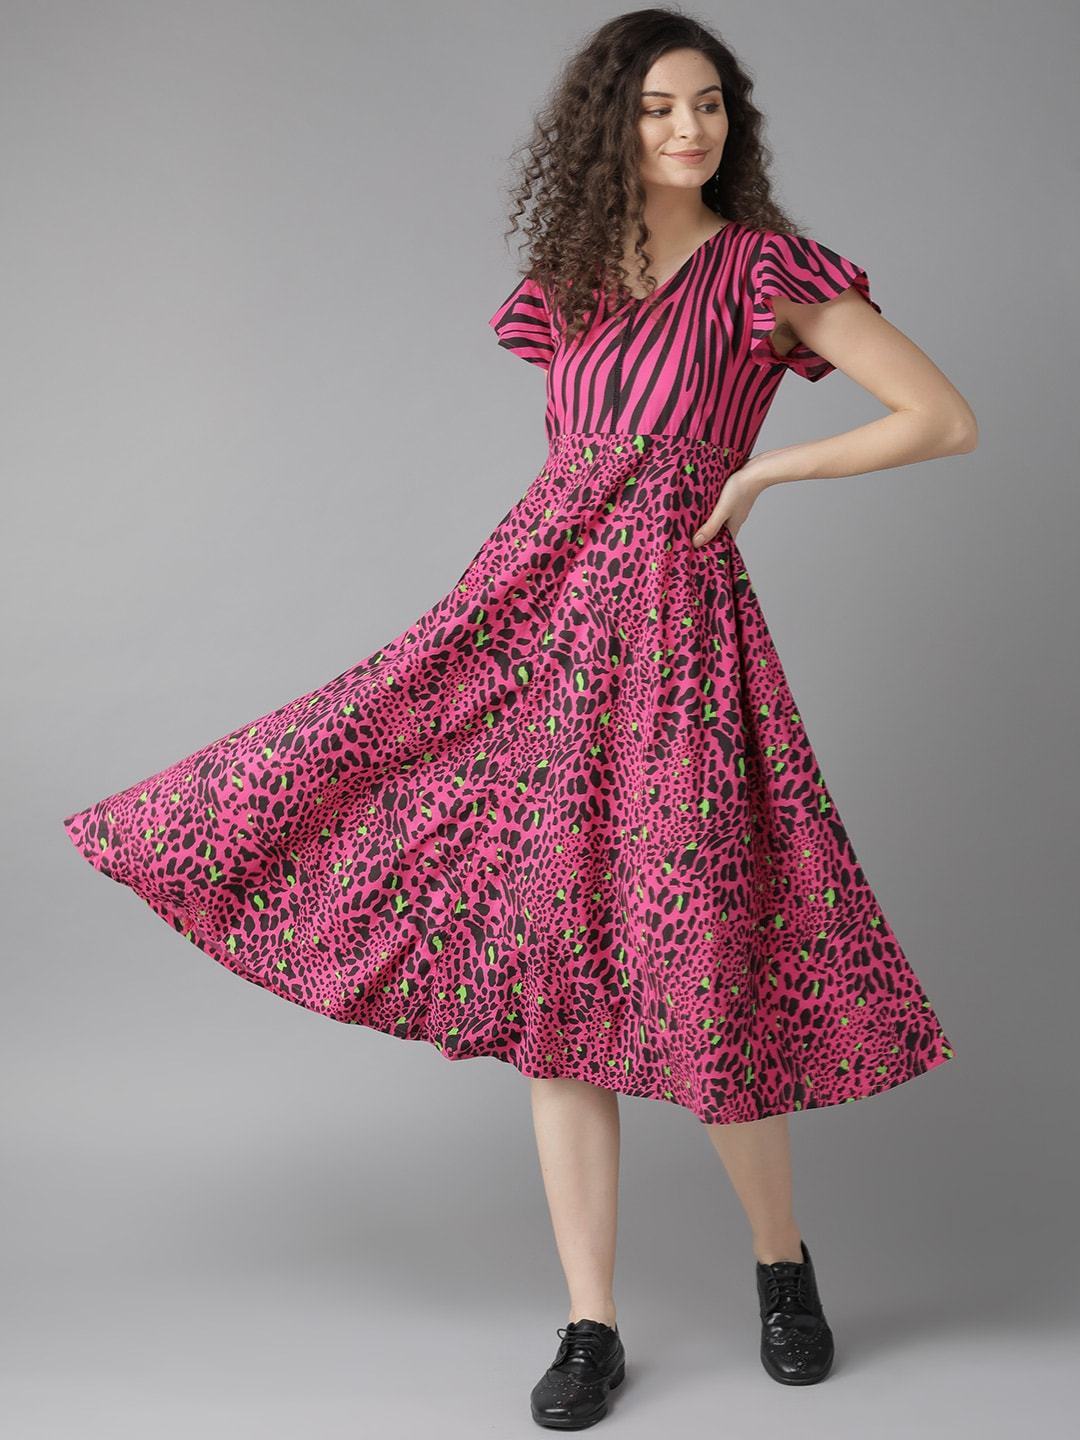 Women's  Pink & Black Animal Printed Fit and Flare Dress - AKS